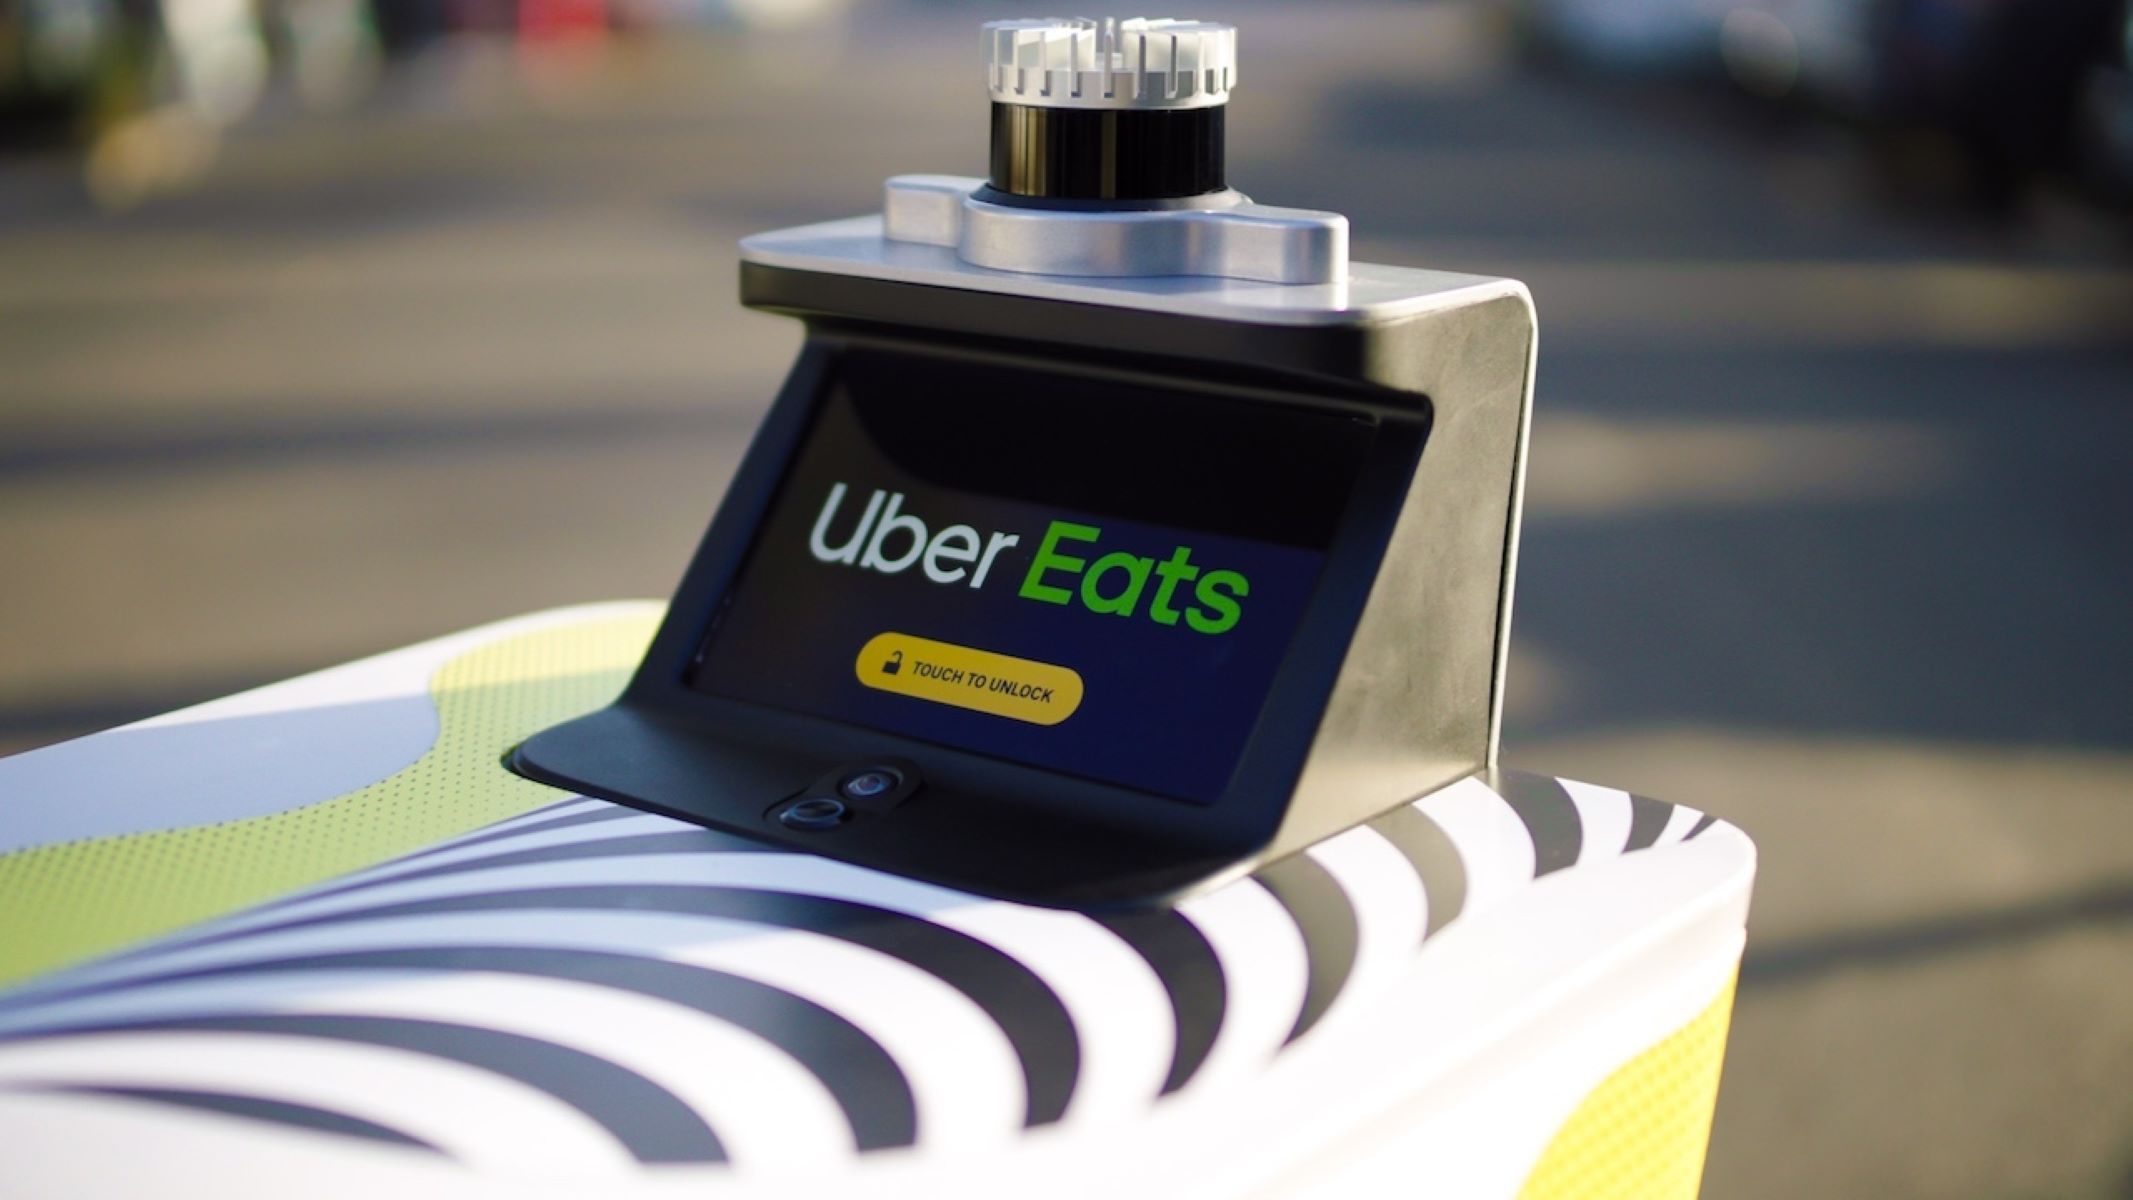 New AI Chatbot To Revolutionize Uber Eats For Quicker Order Placement